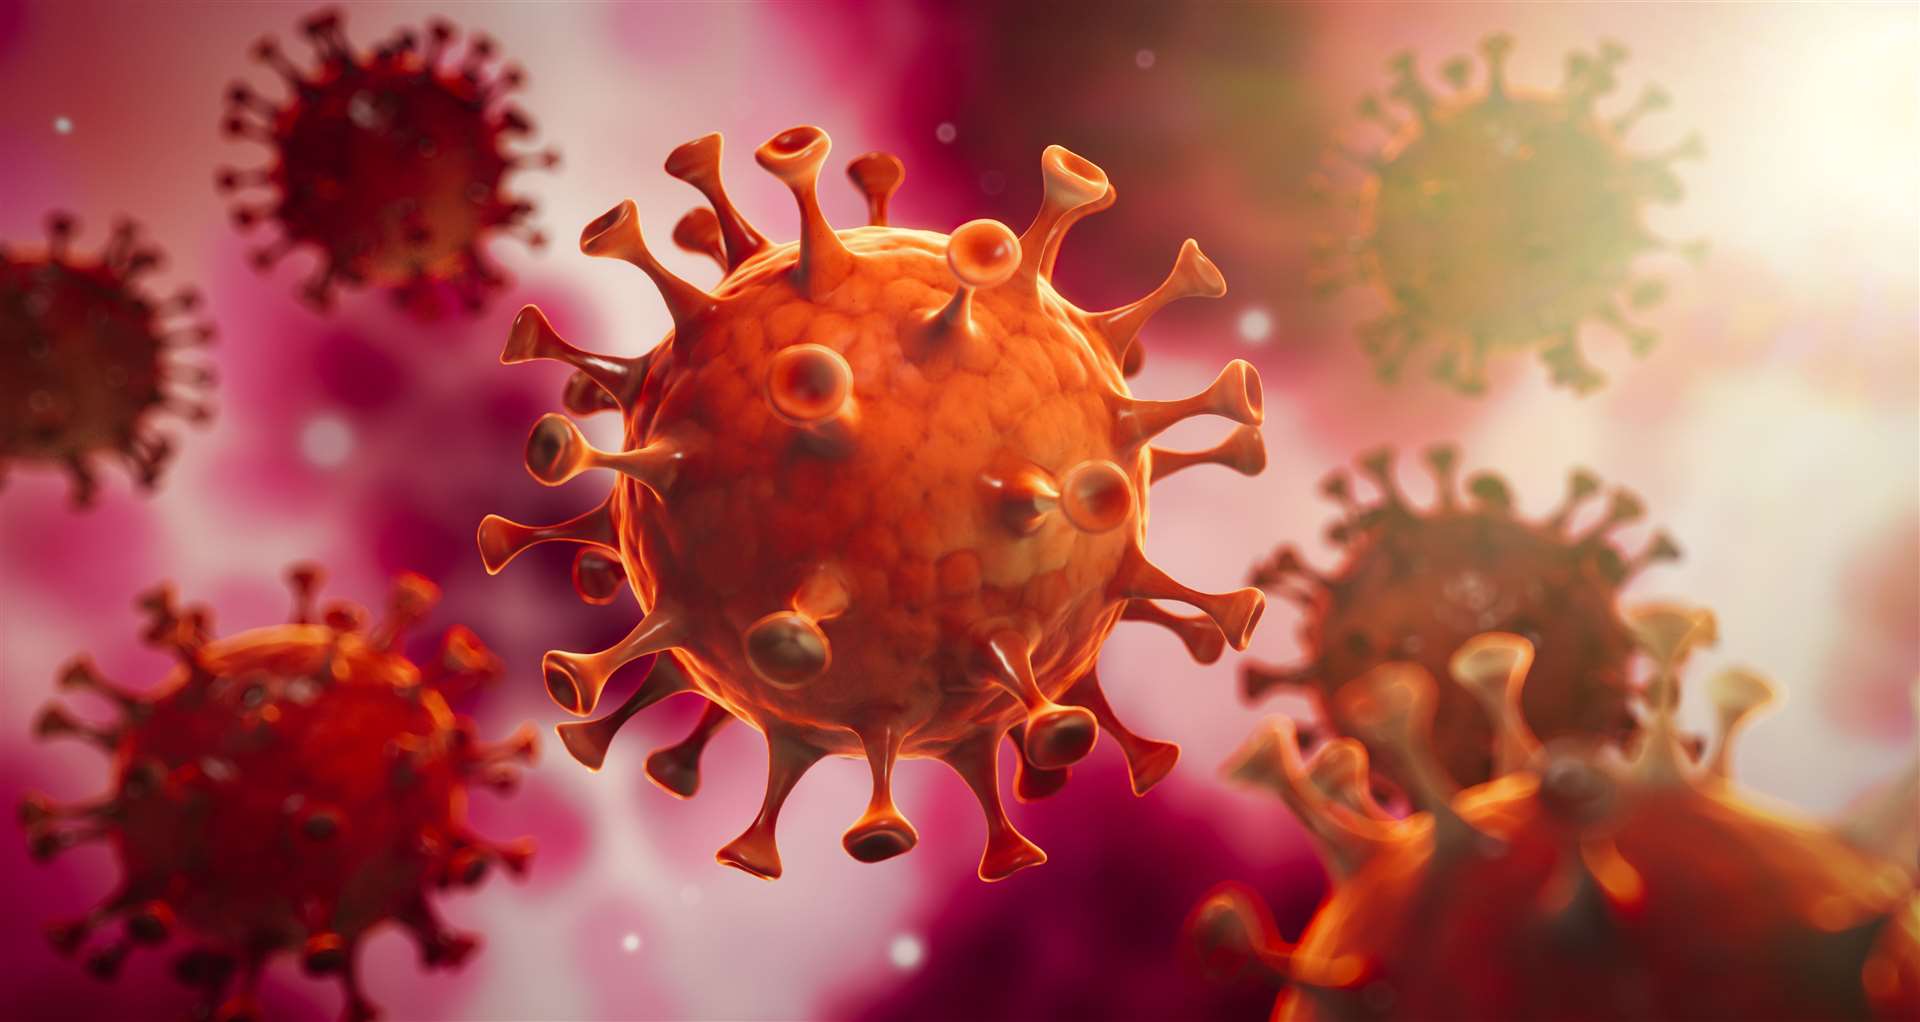 There is currently no specific treatment or vaccine for coronavirus (Covid-19).